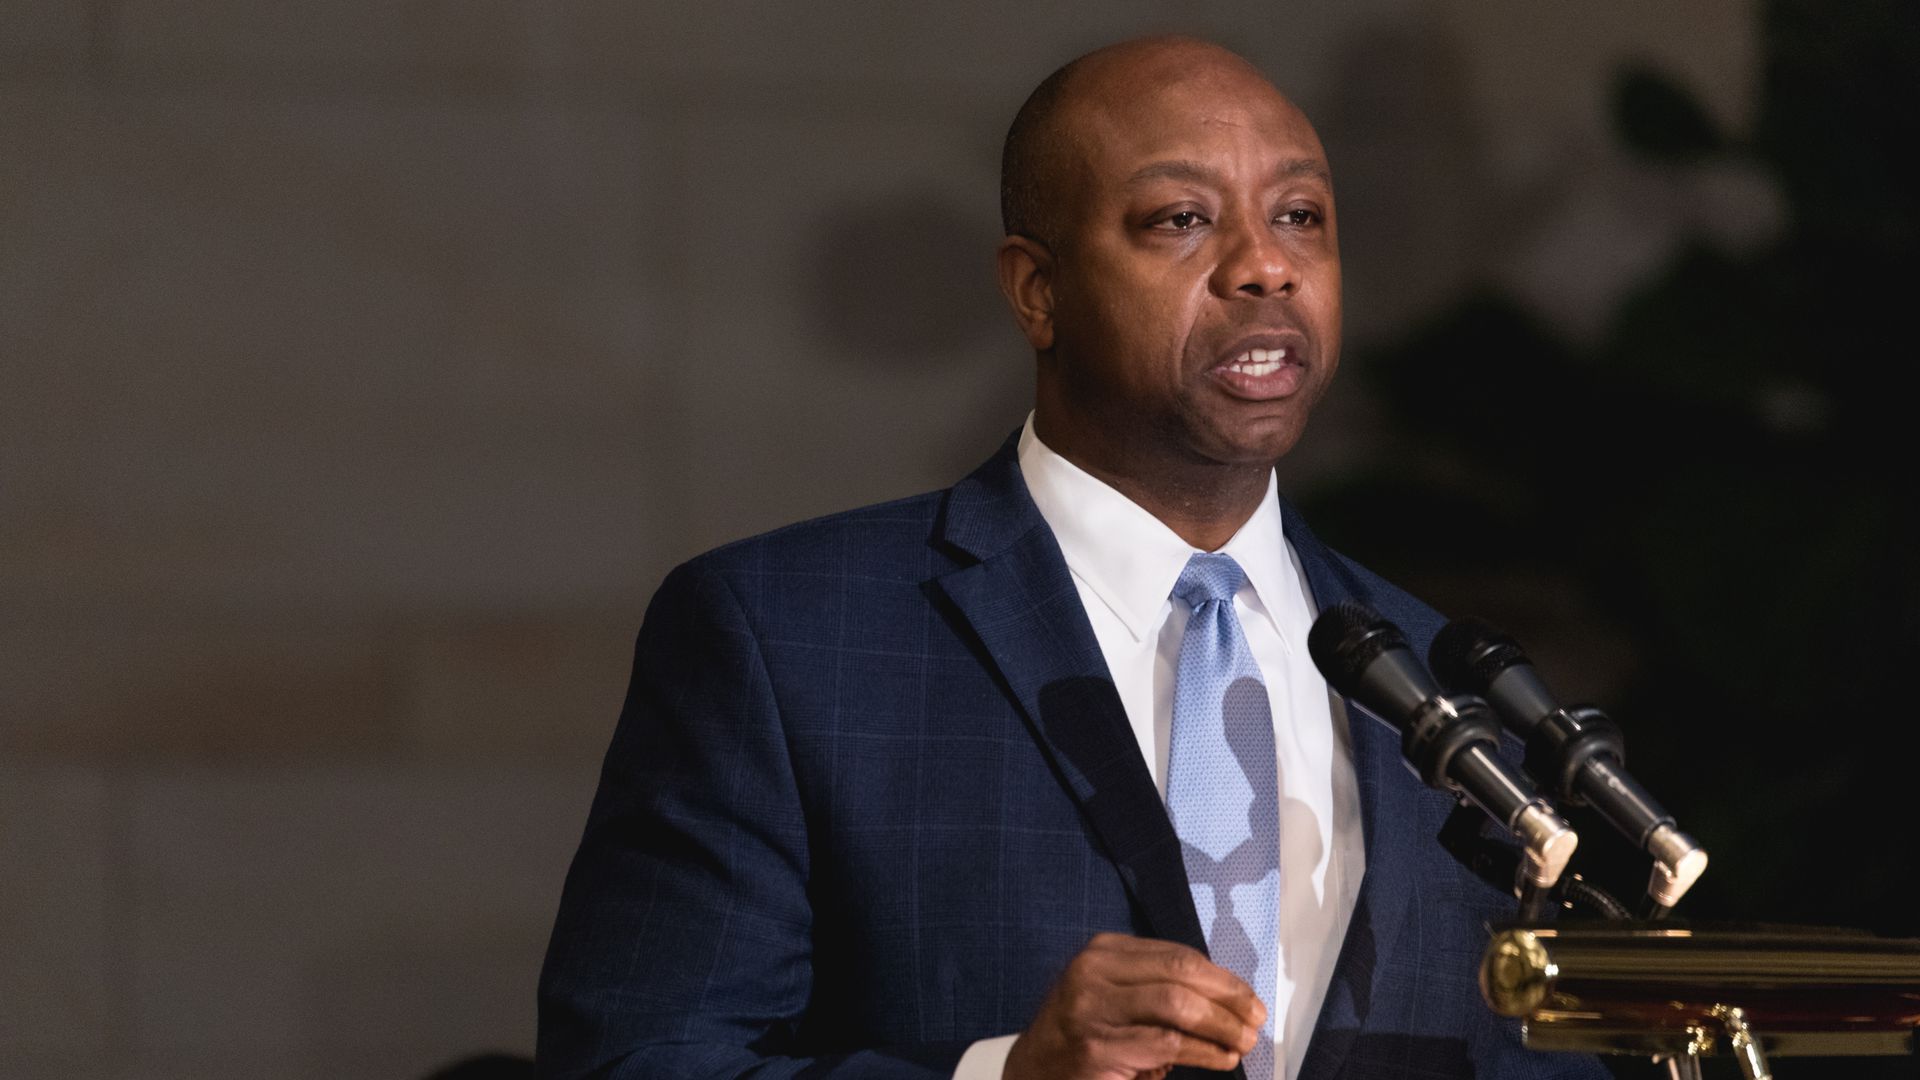 Sen. Tim Scott speaks at a podium which holds two microphones